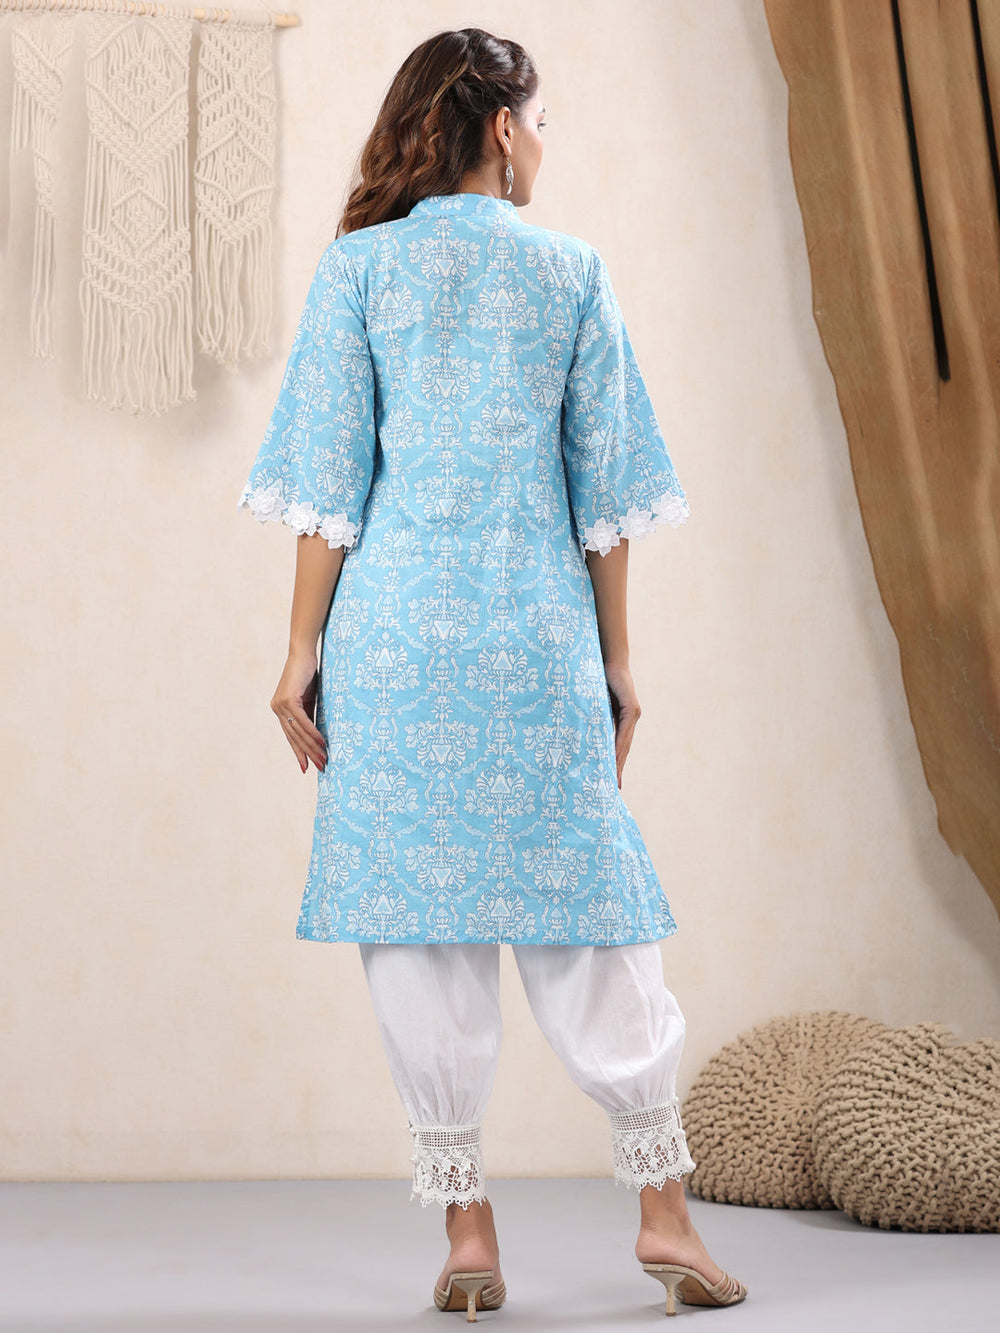 Skyblue-Lace-Detailing-Kurta-Only